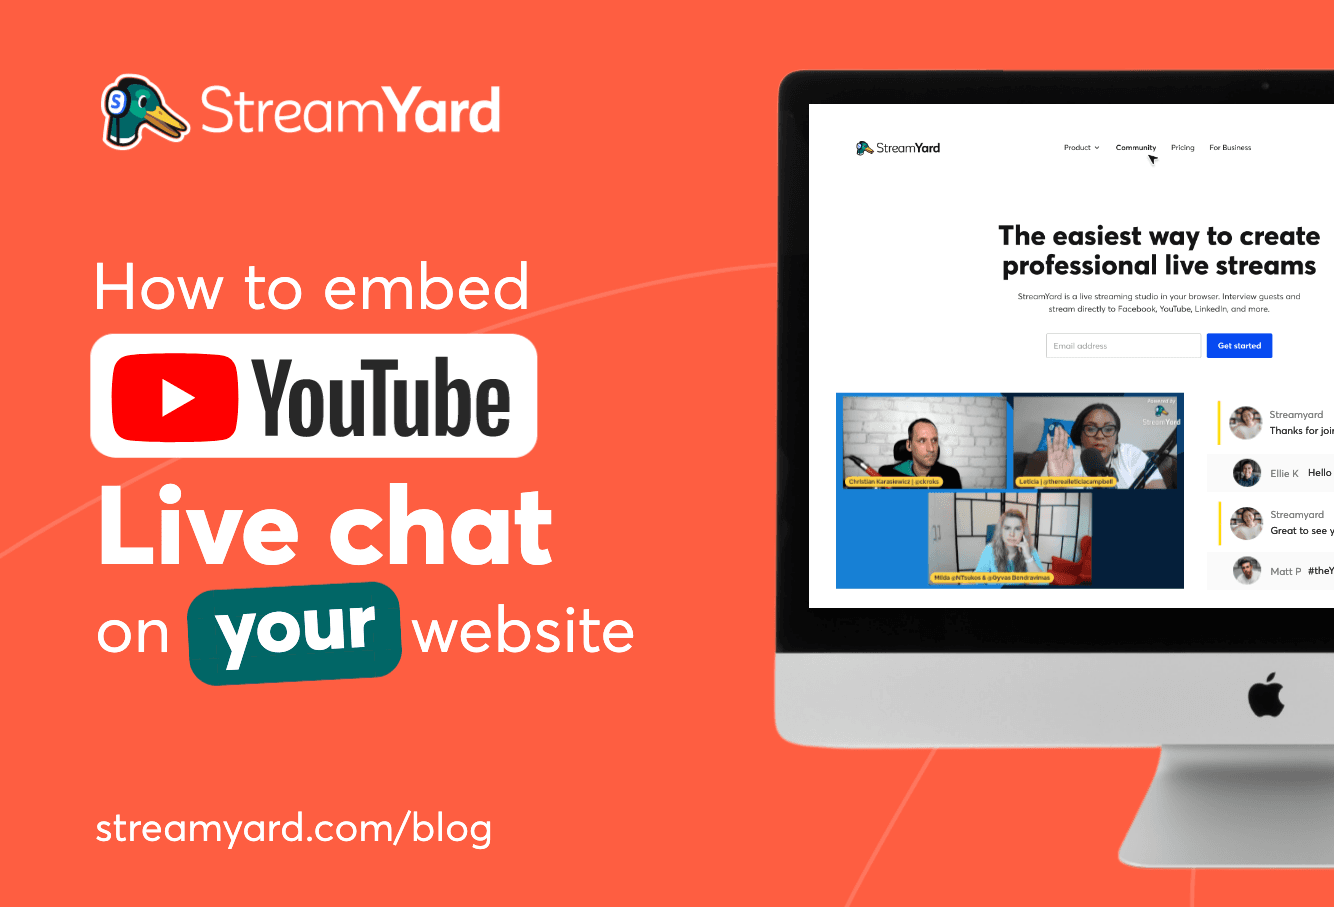 Improve your live stream engagement with live chat. Learn how to embed live chat from YouTube into your website or blog and leverage it for better live streams.